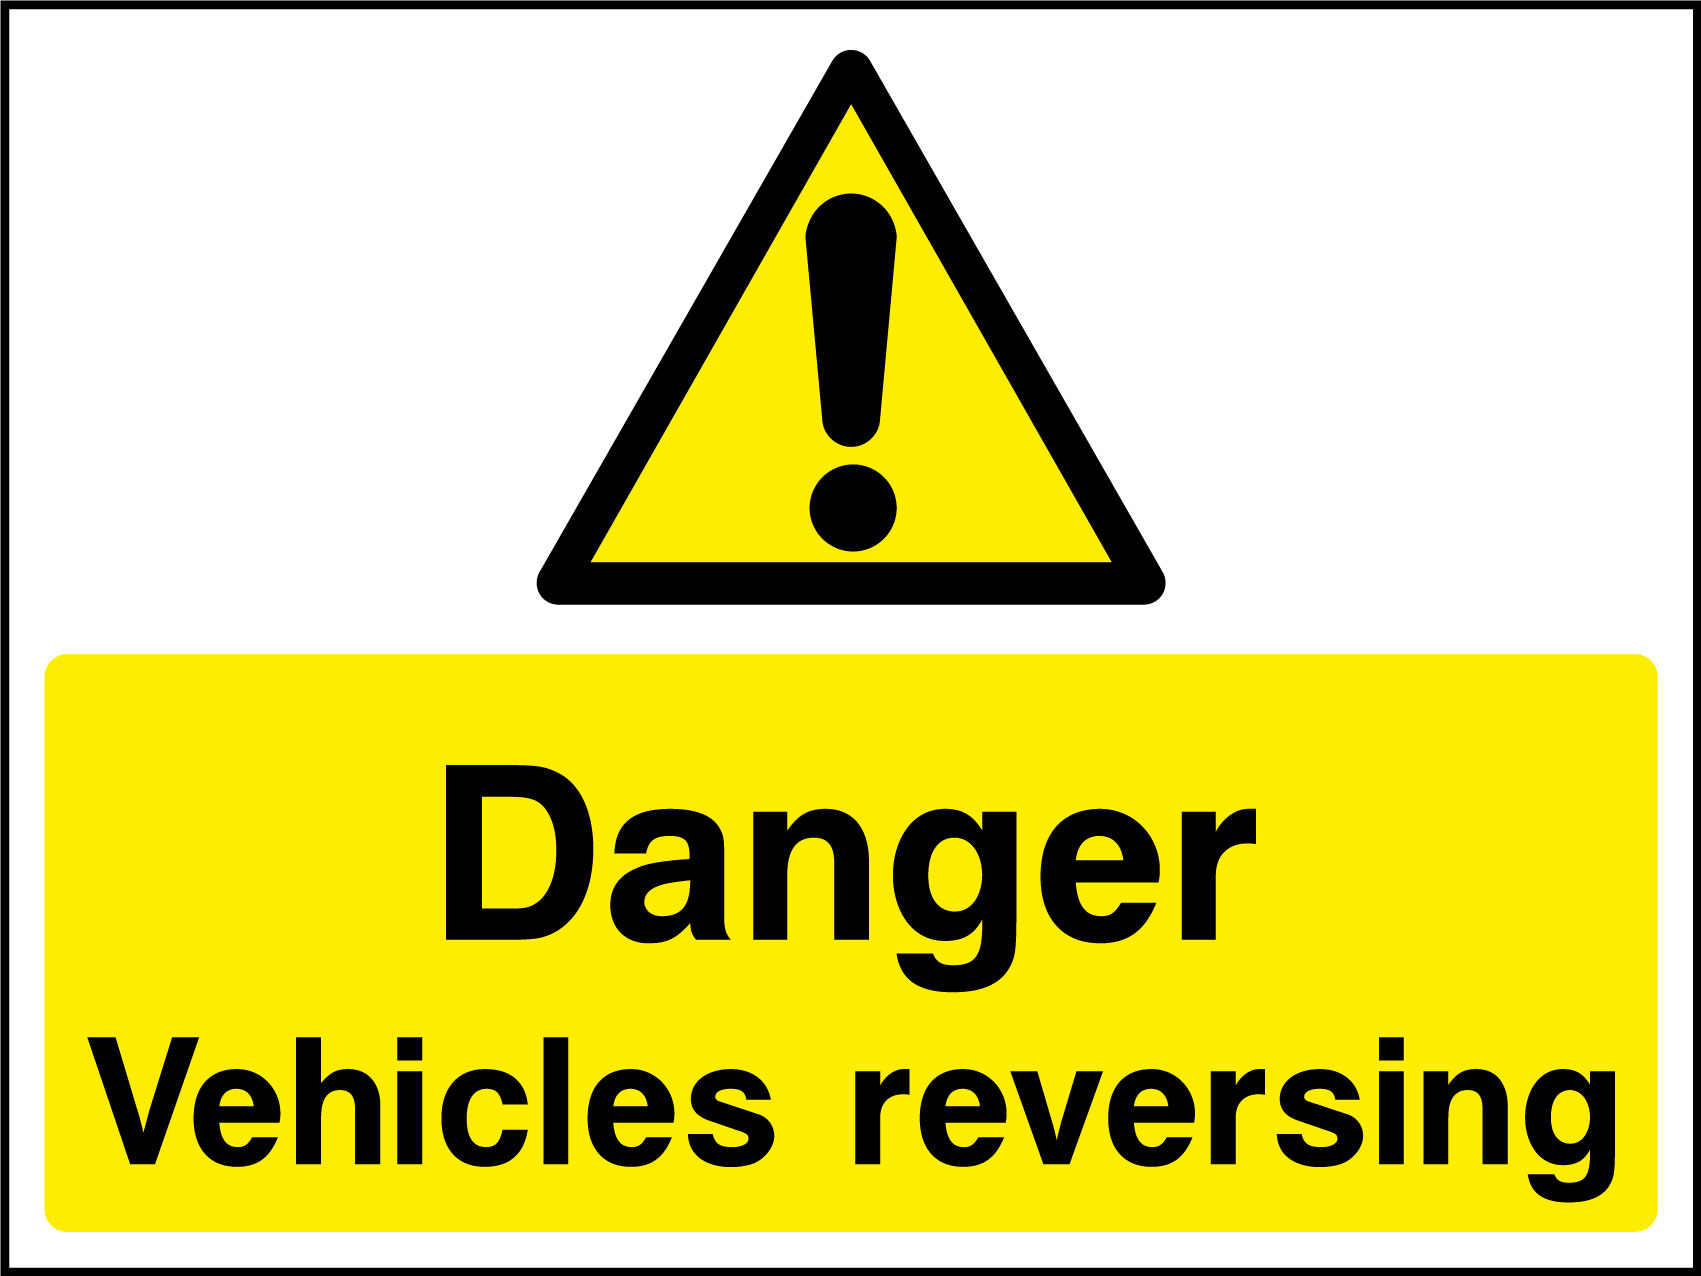 Vehicles reversing sign | Health and Safety Signs